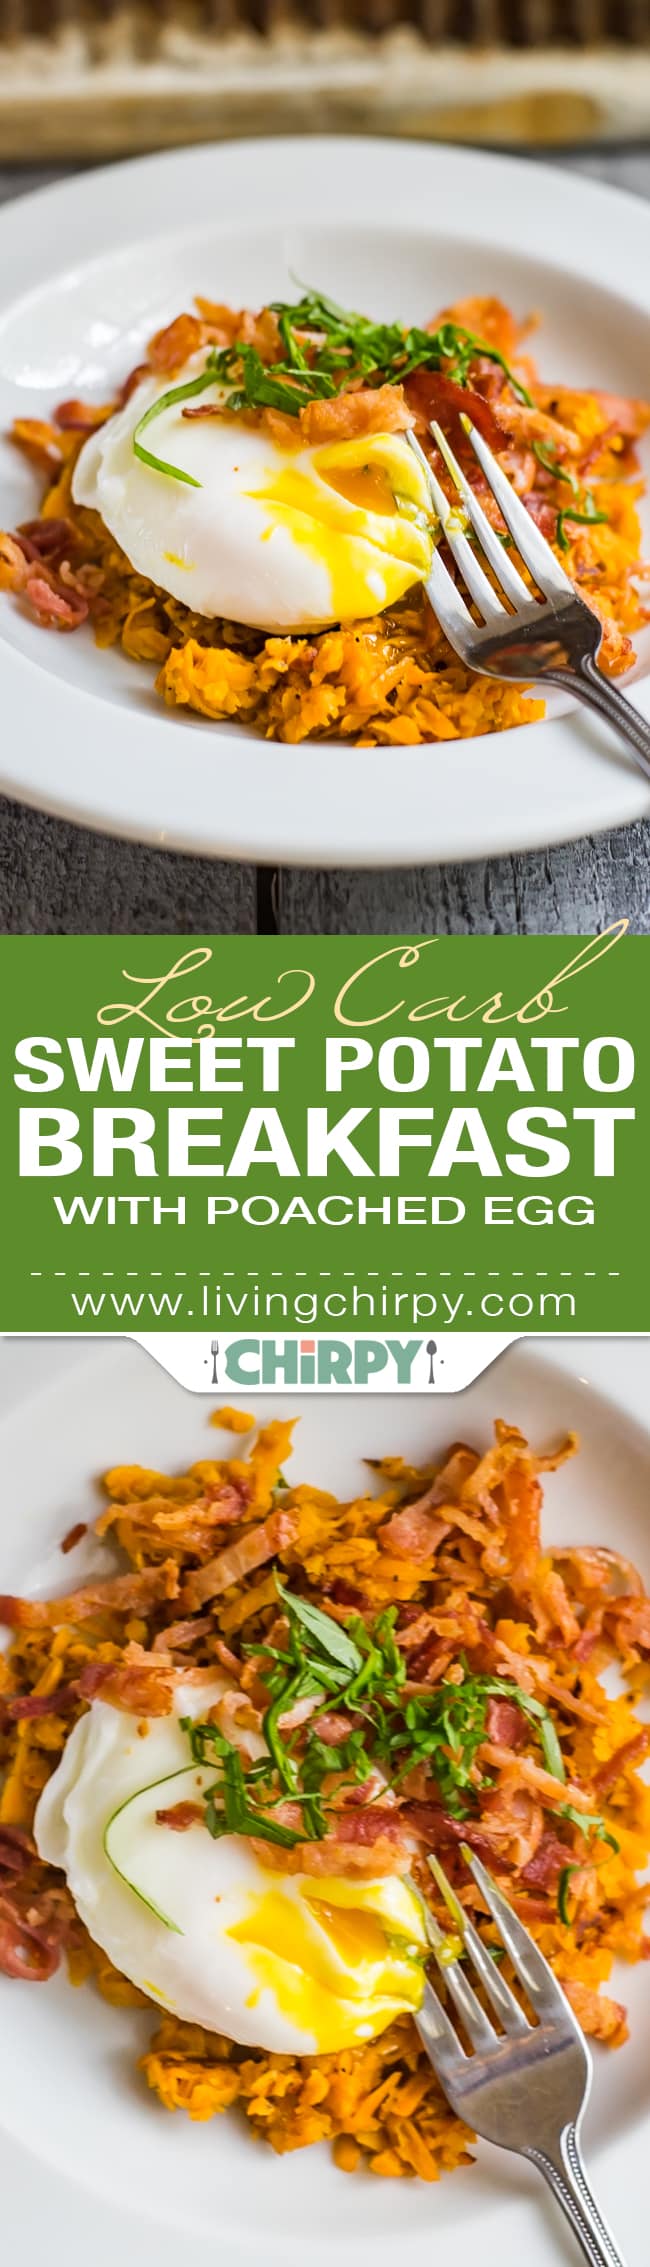 low-carb sweet potato breakfast with poached egg